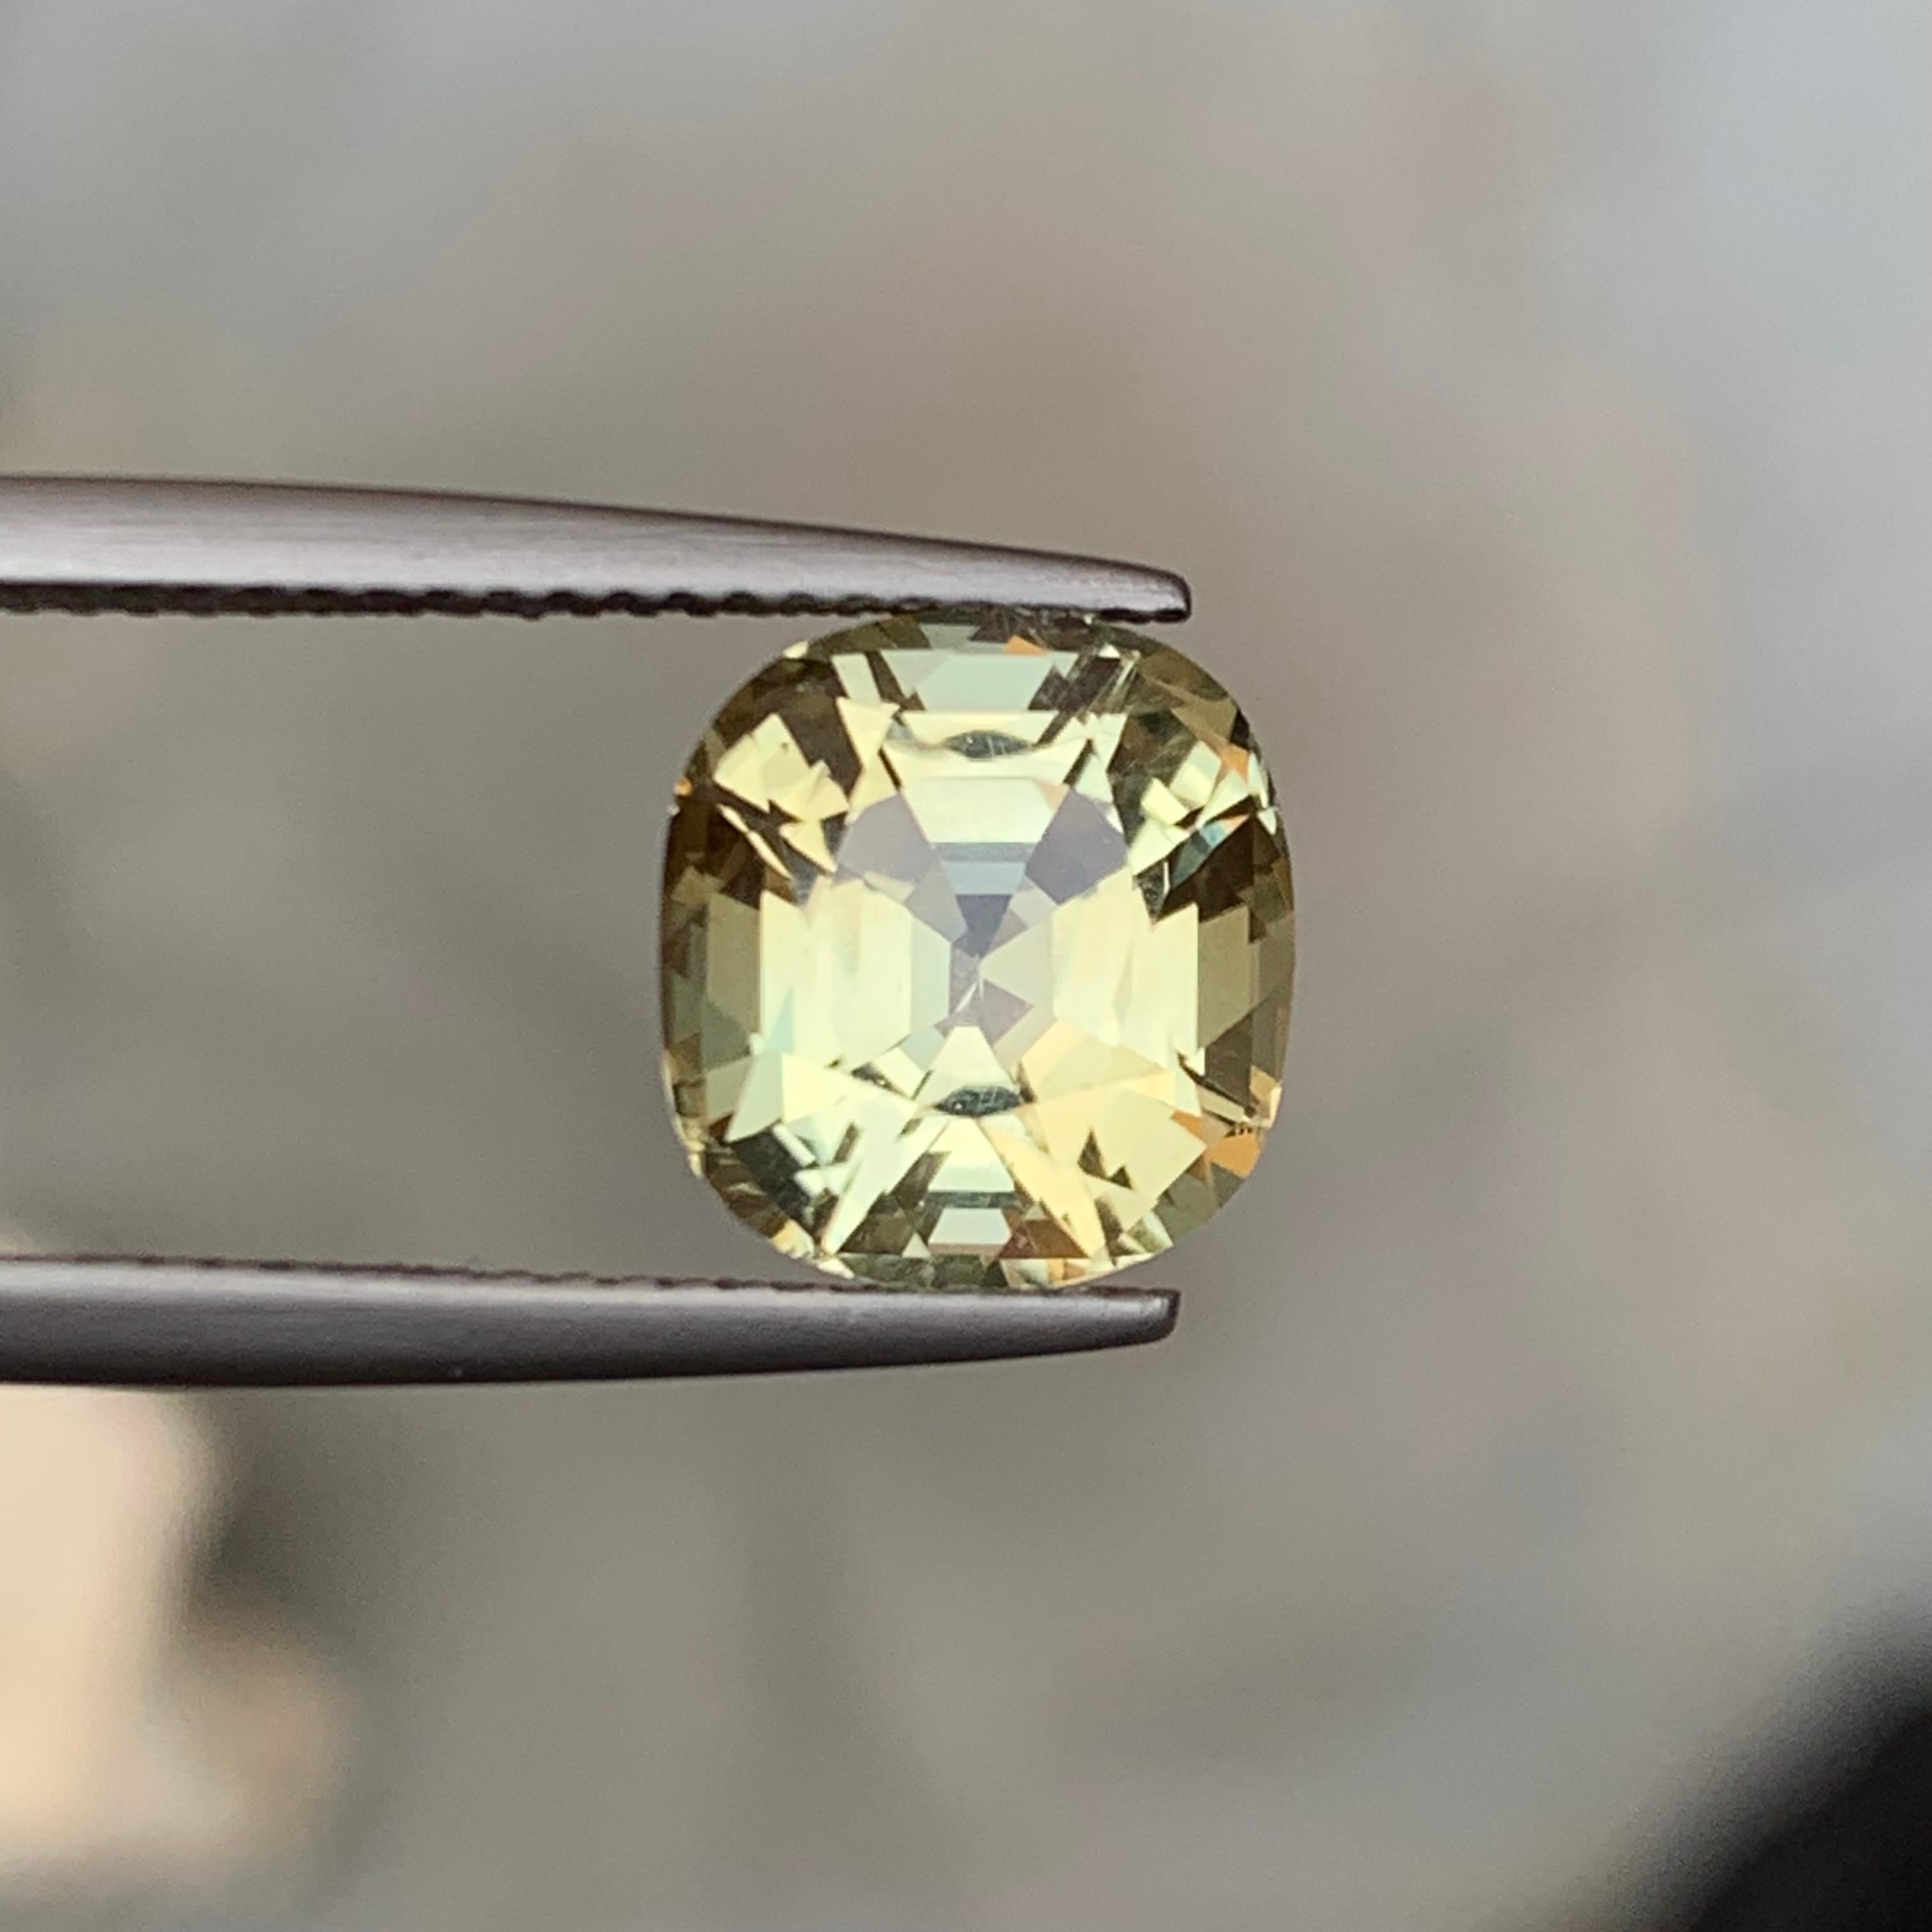 Rare Light Golden Yellow Natural Tourmaline Gemstone 4.15Ct Cushion Cut for Ring For Sale 3